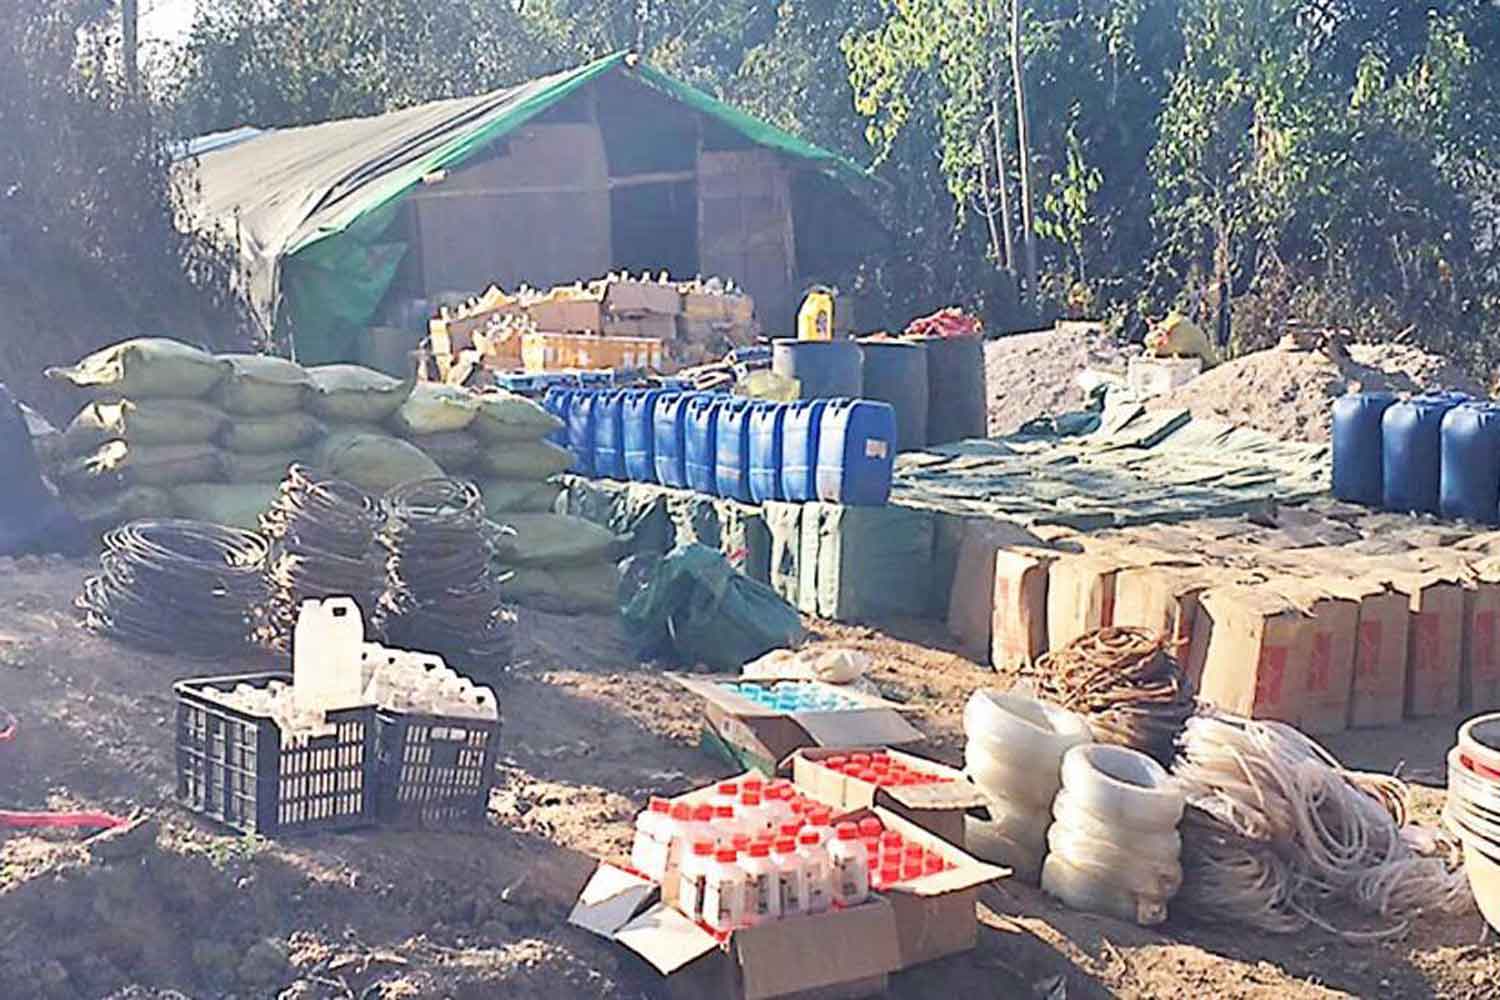 Some of the hundreds of containers of chemicals and precursors found at the plant in Kutkai township of the Shan State of Myanmar, raided by the Myanmar armed forces last Friday. (Photo supplied)